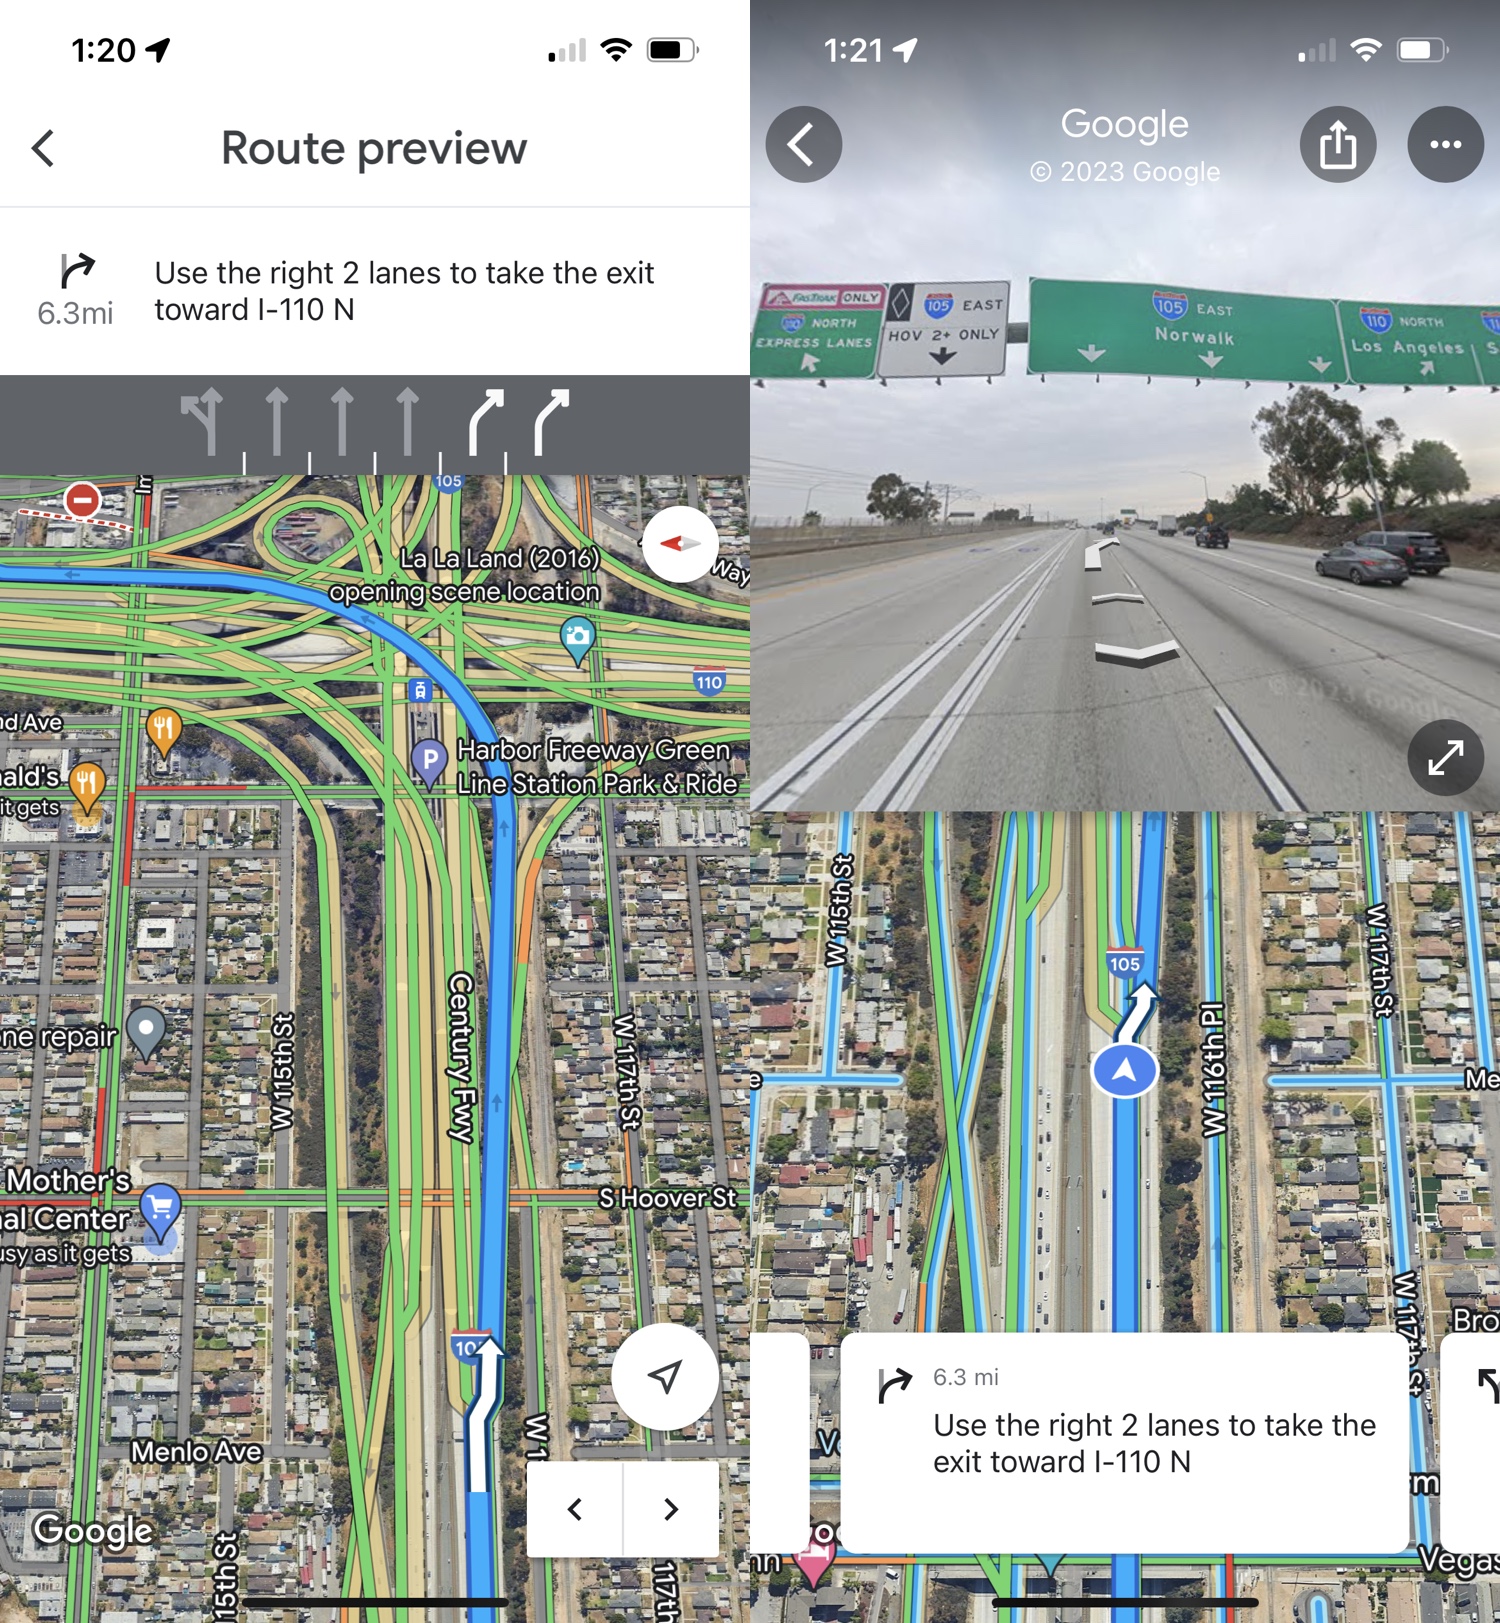 Google Maps view of the reverse direction from 105 E at the interchange.